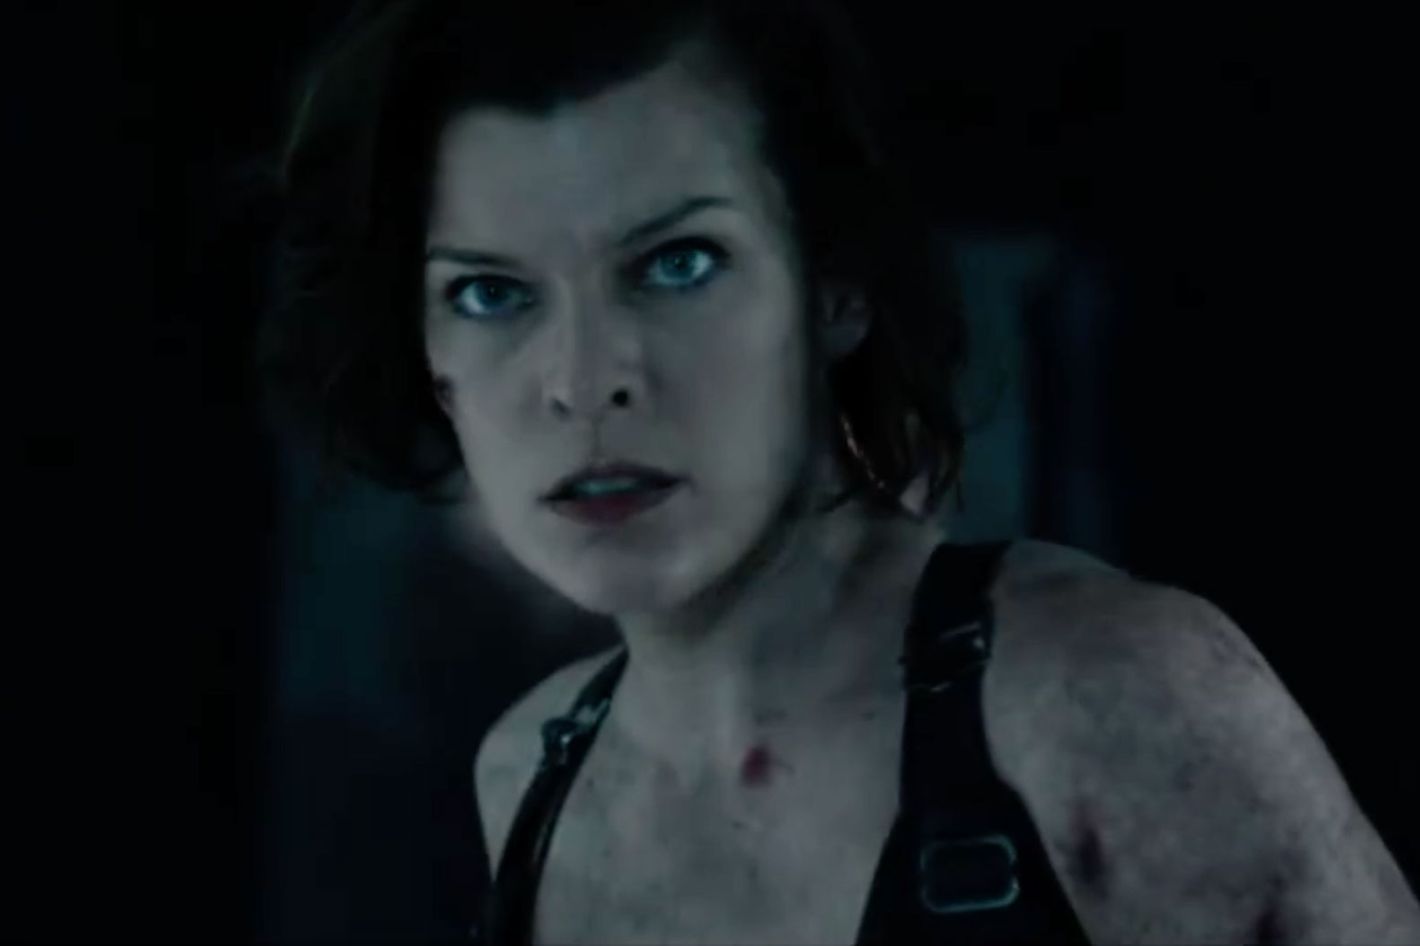 Teaser Trailers Previews: “Resident Evil: The Final Chapter”